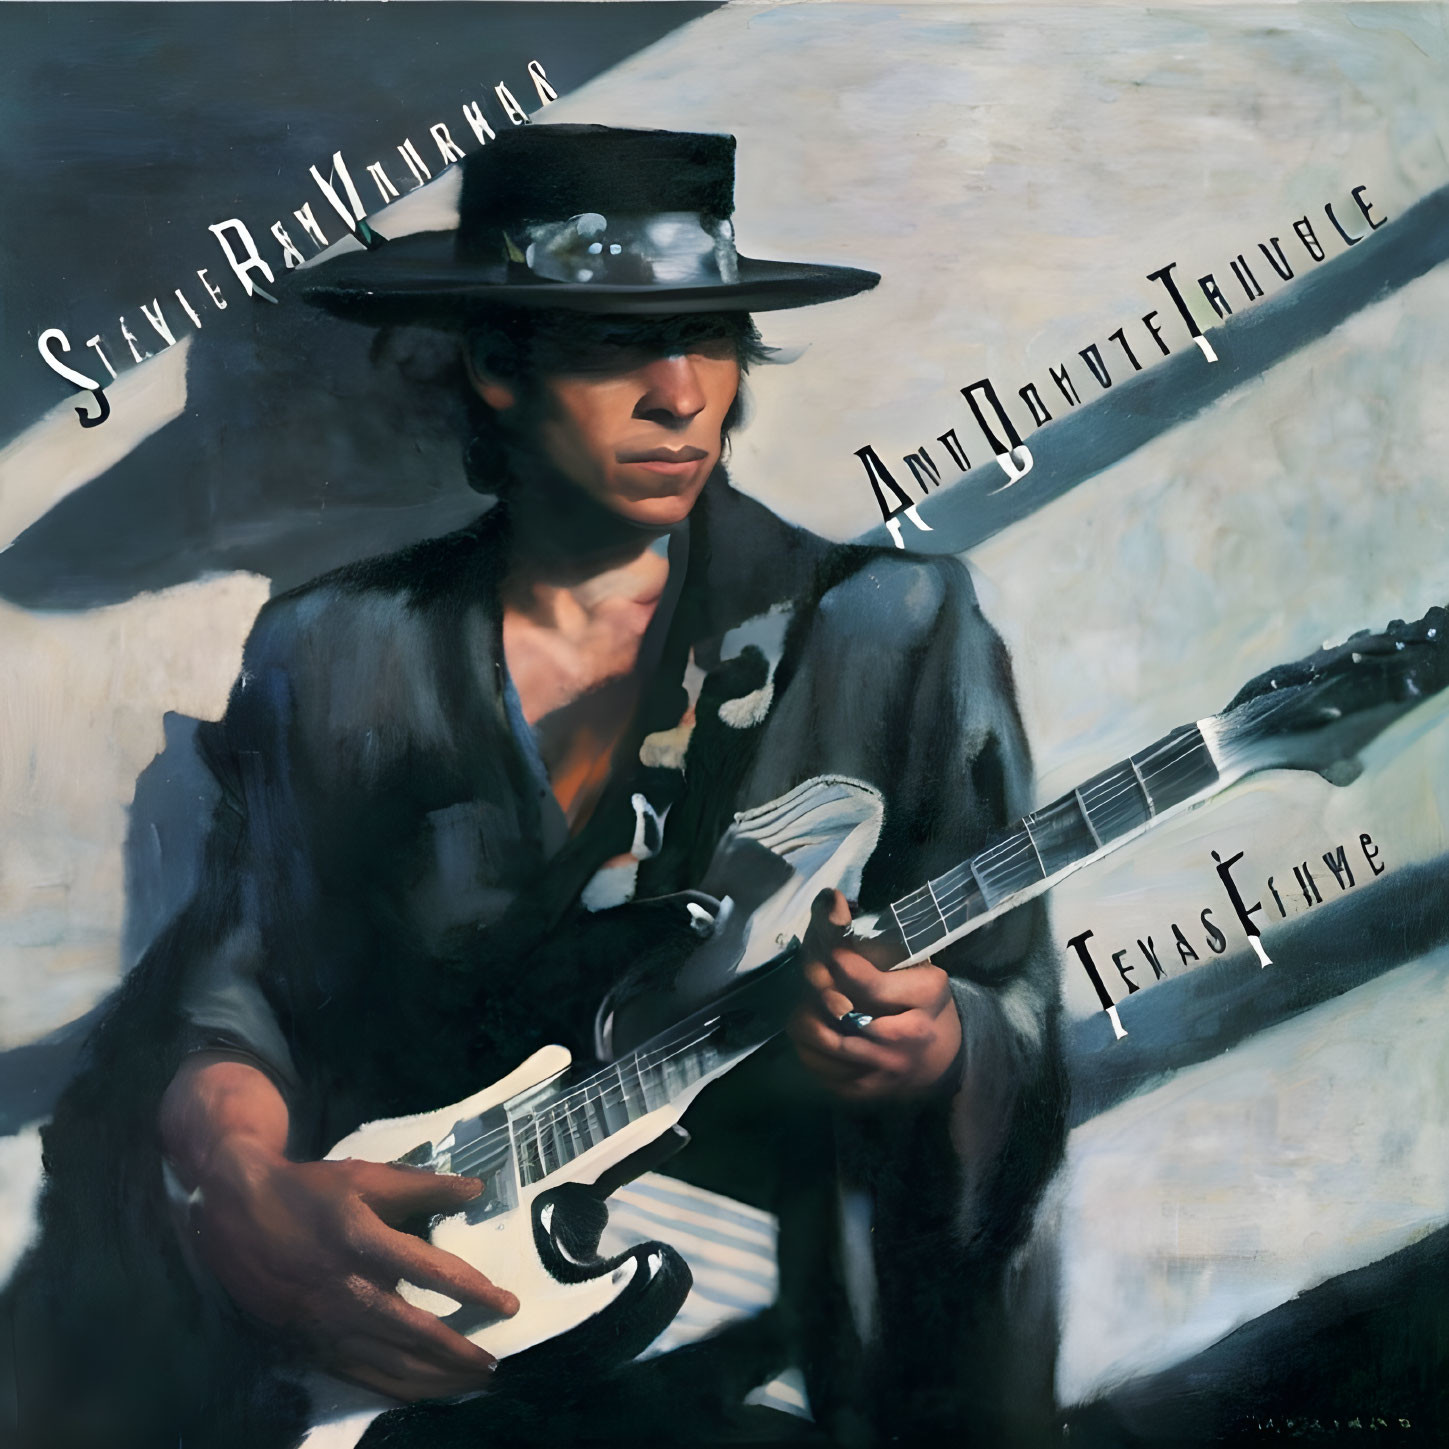 Double Trouble Stevie Ray Vaughn